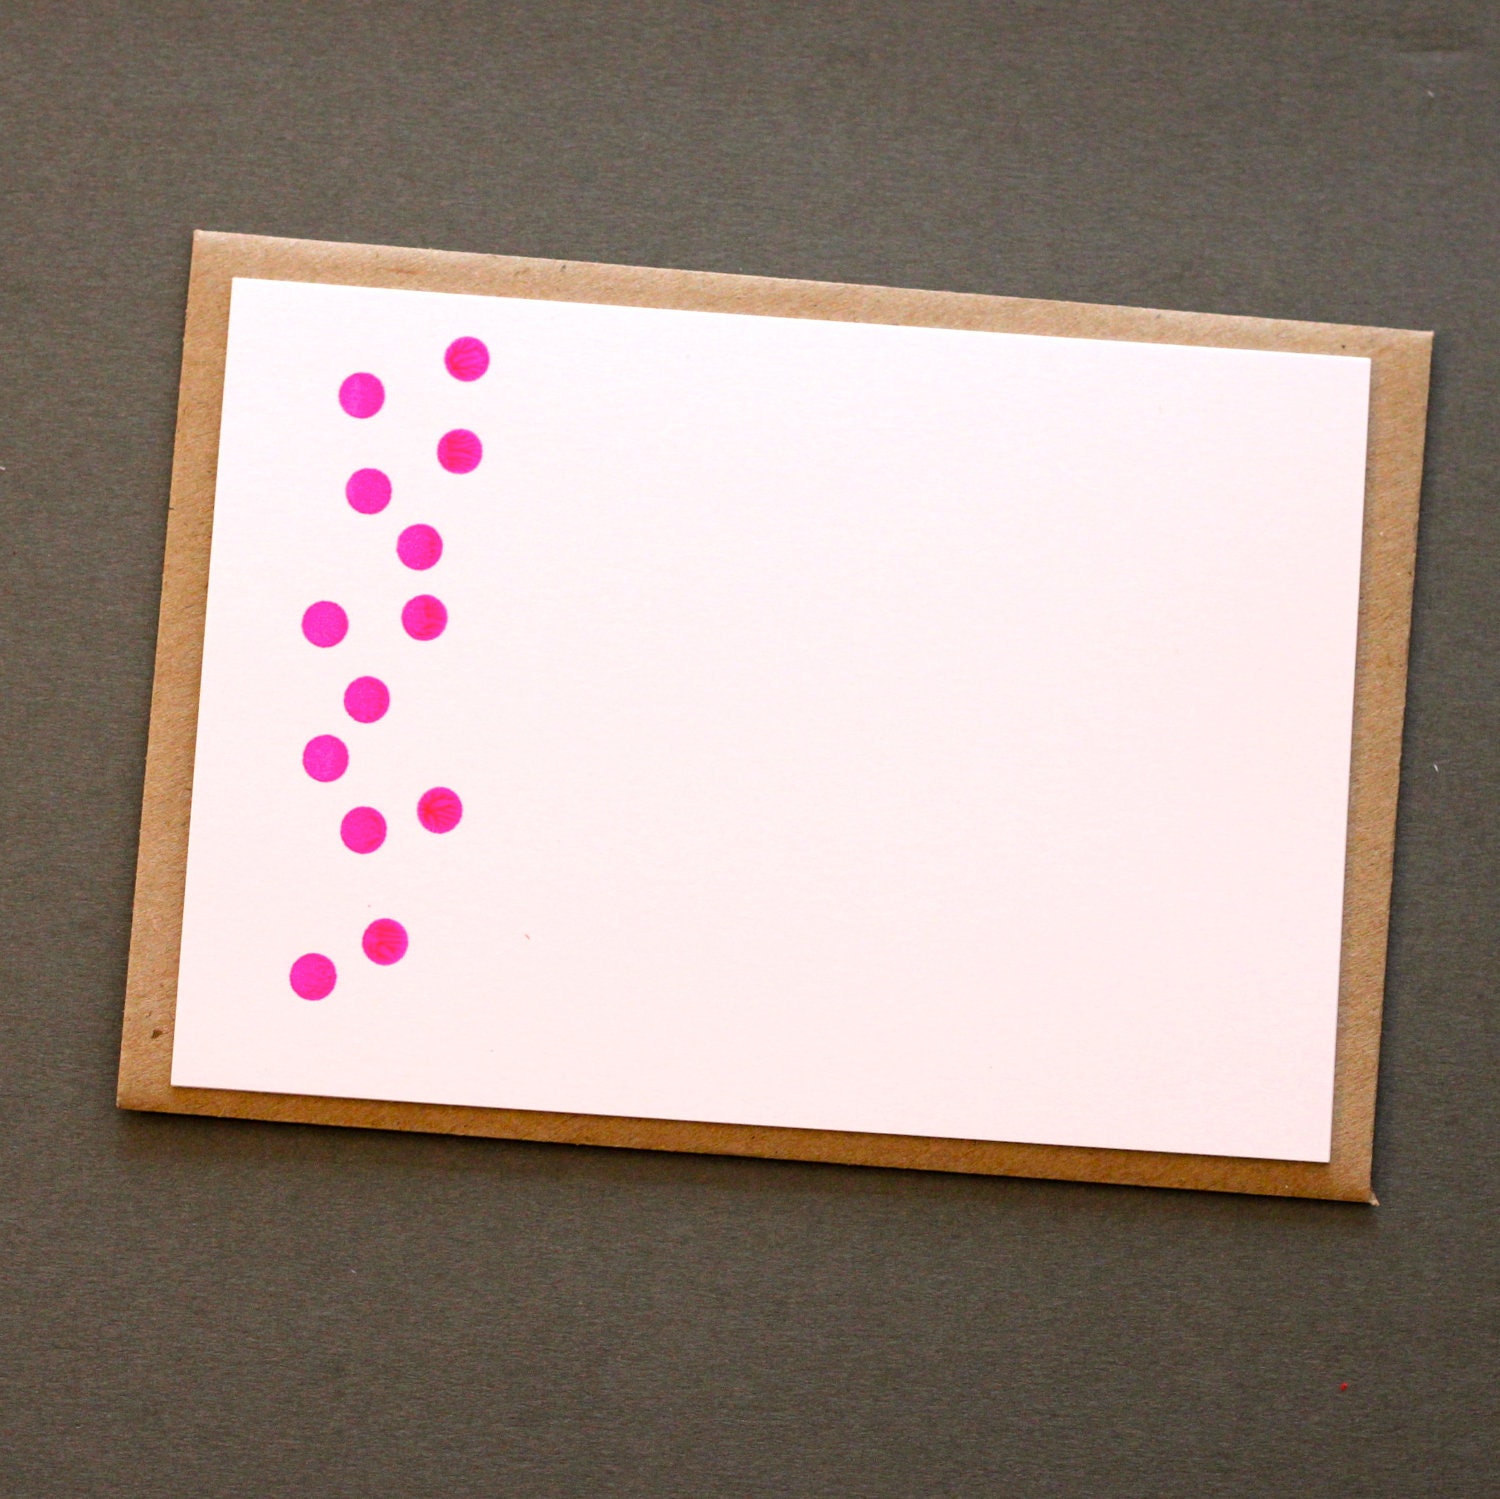 NEON DOTTY NOTECARDS - Set of Five Screen Printed Notecards